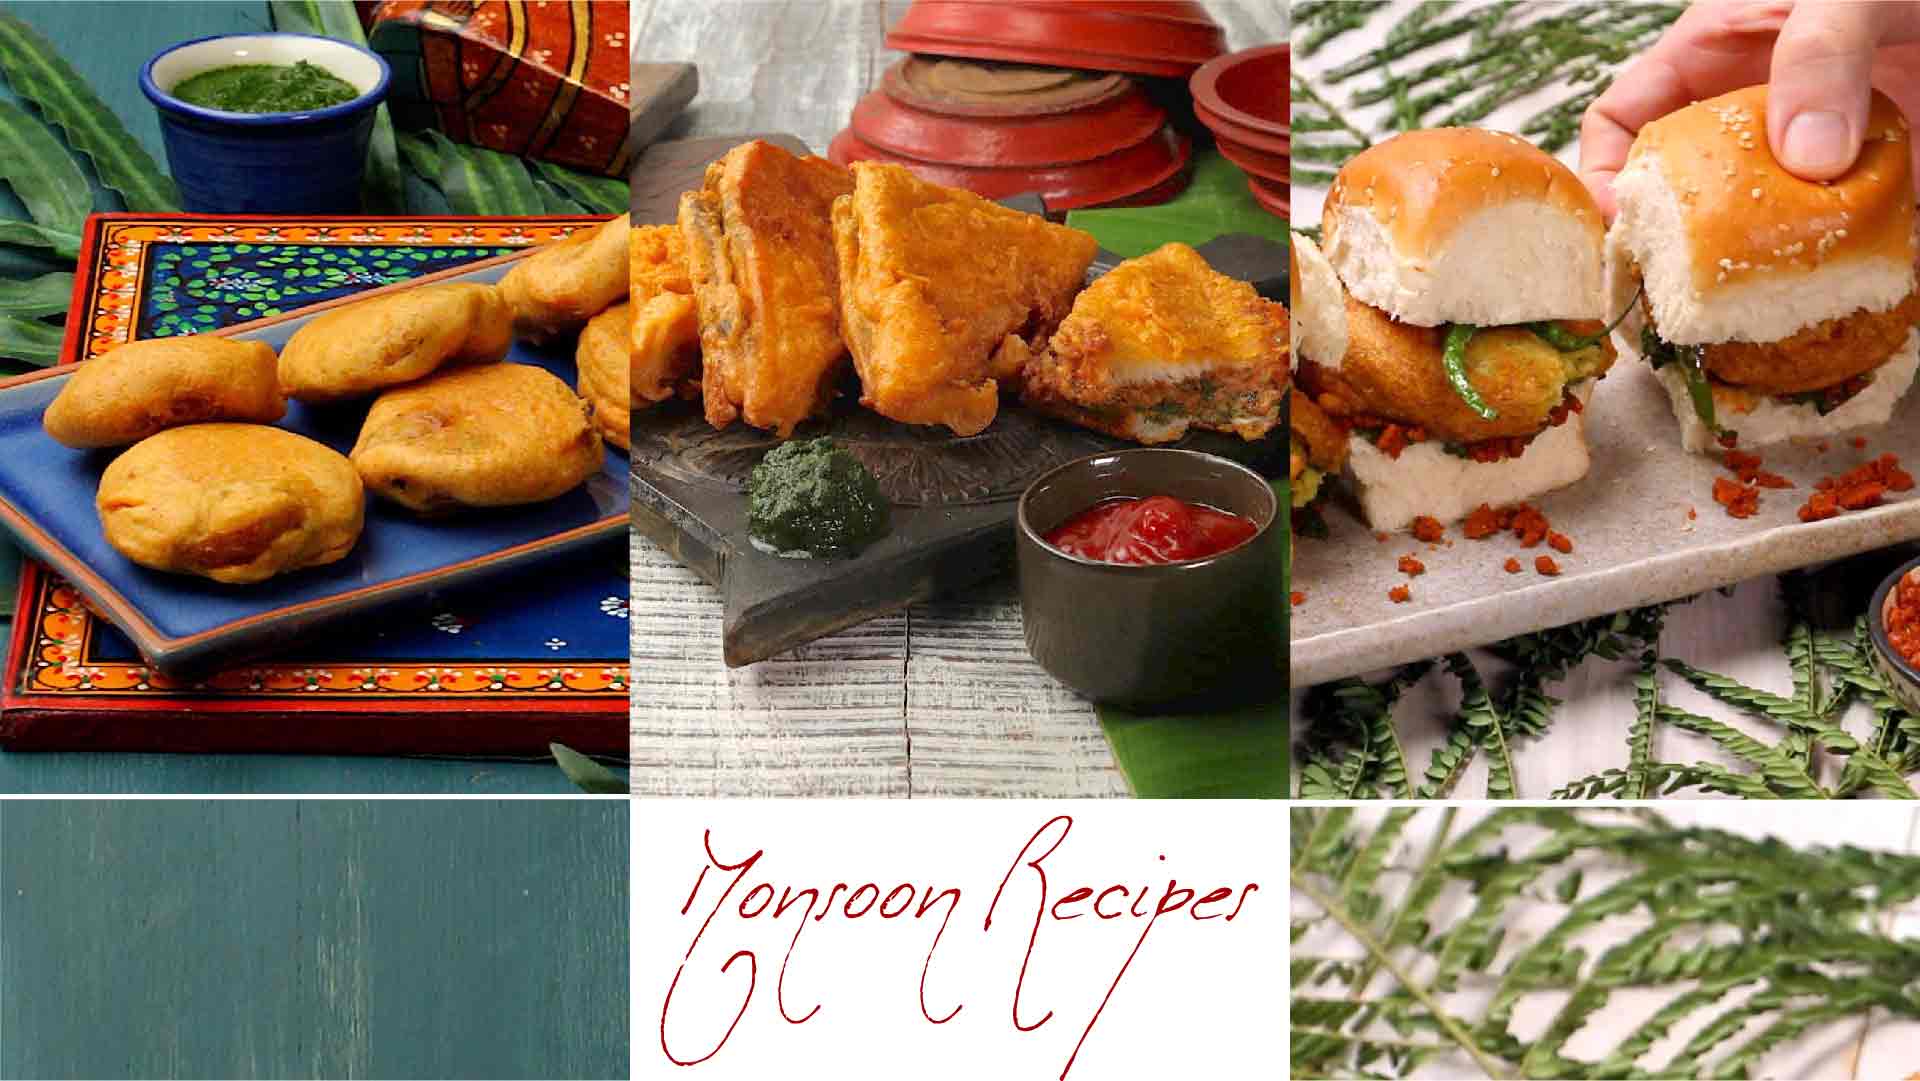 Monsoon Recipes: Essential Monsoon Recipes | Monsoon Recipes You Just Have to Try